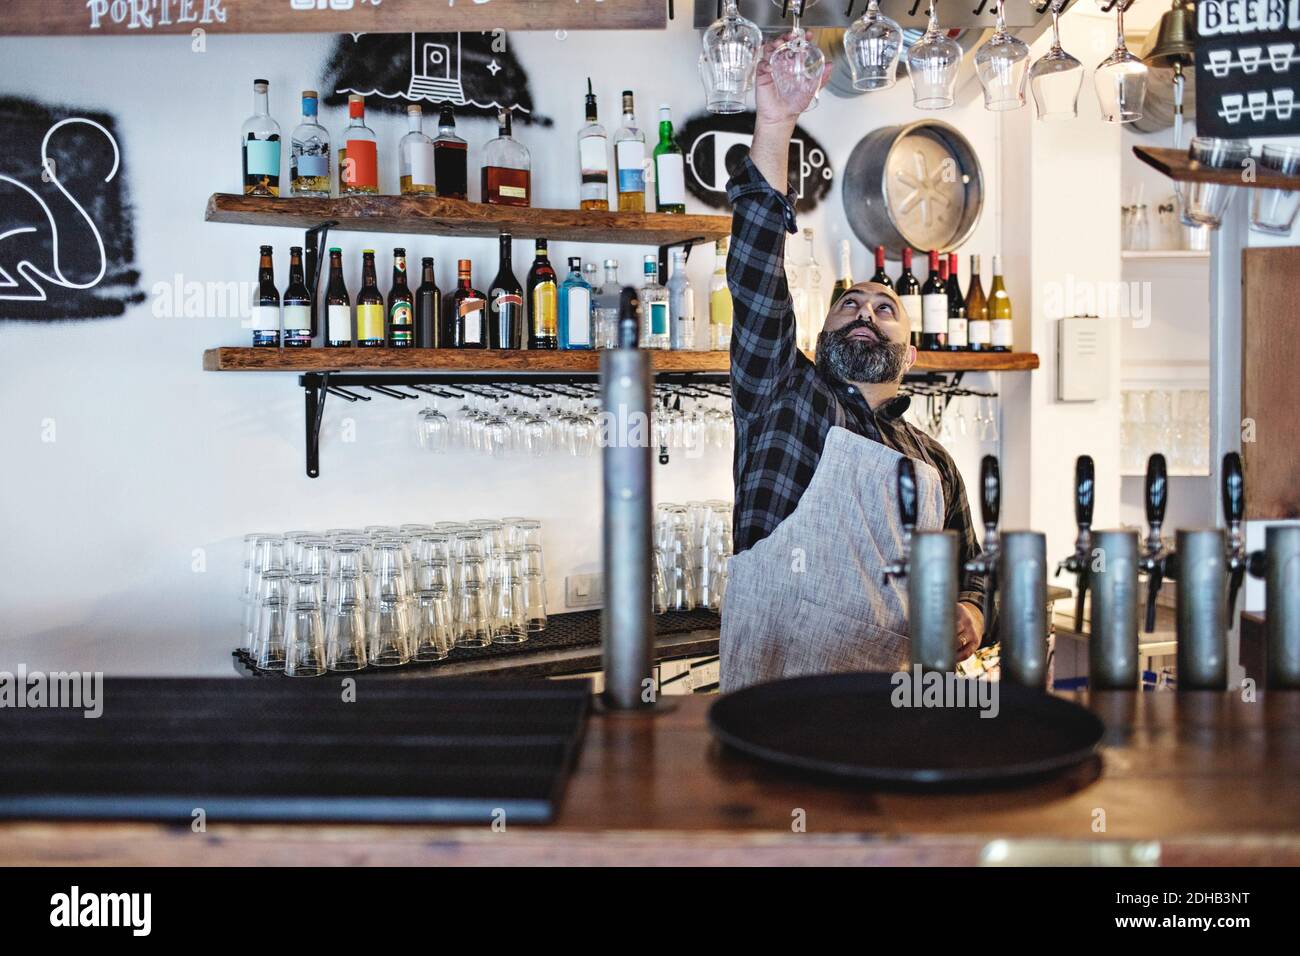 Bartender arranging wineglasses while standing at bar counter Stock Photo